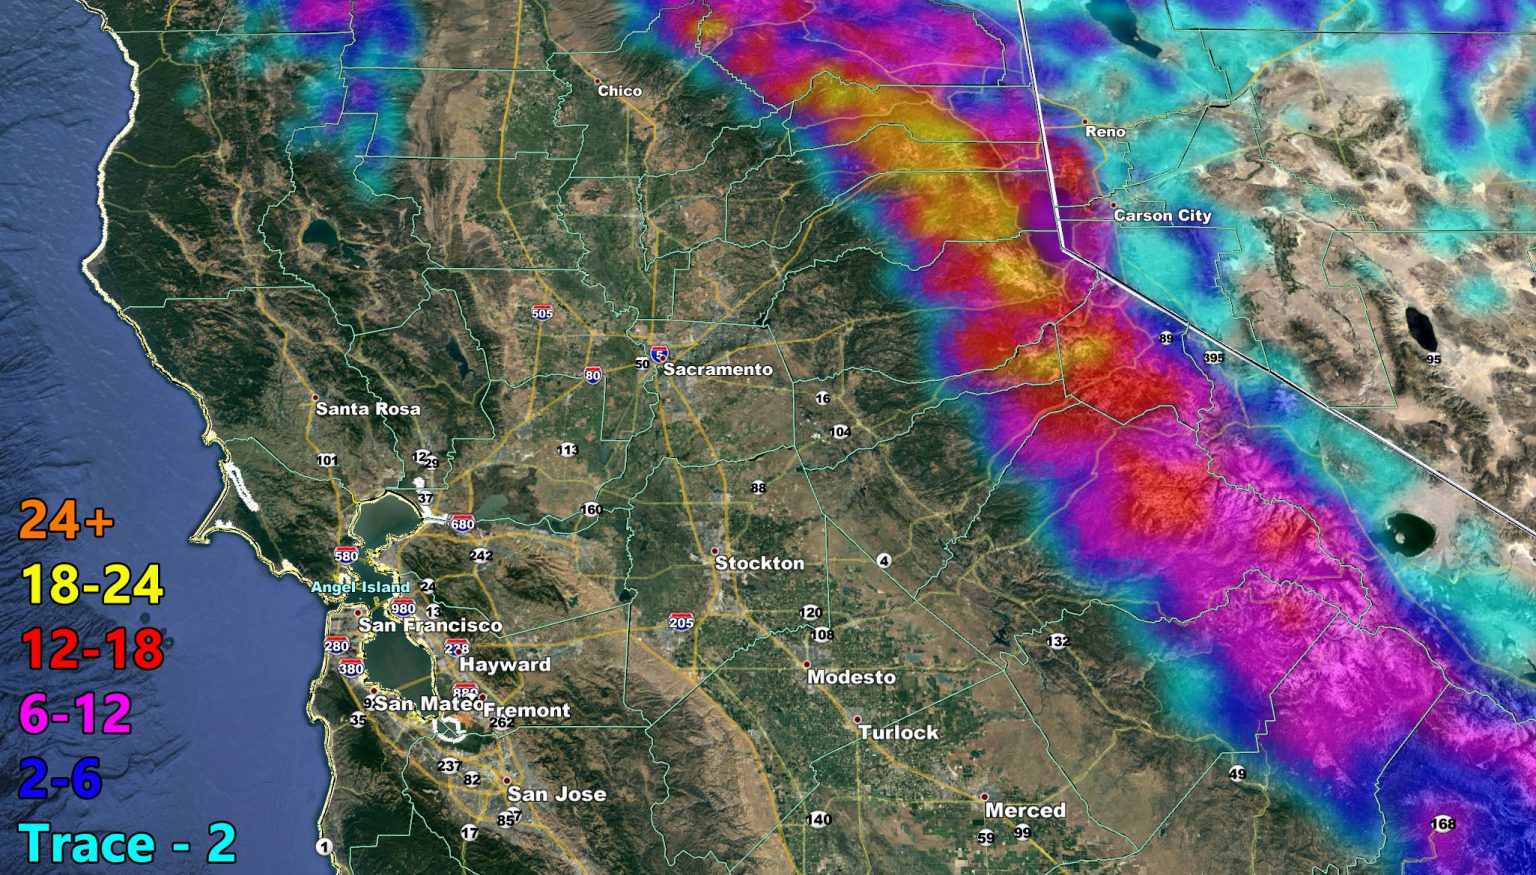 Sunday Storm System Into Northern California; Rain, Flood Risk, and